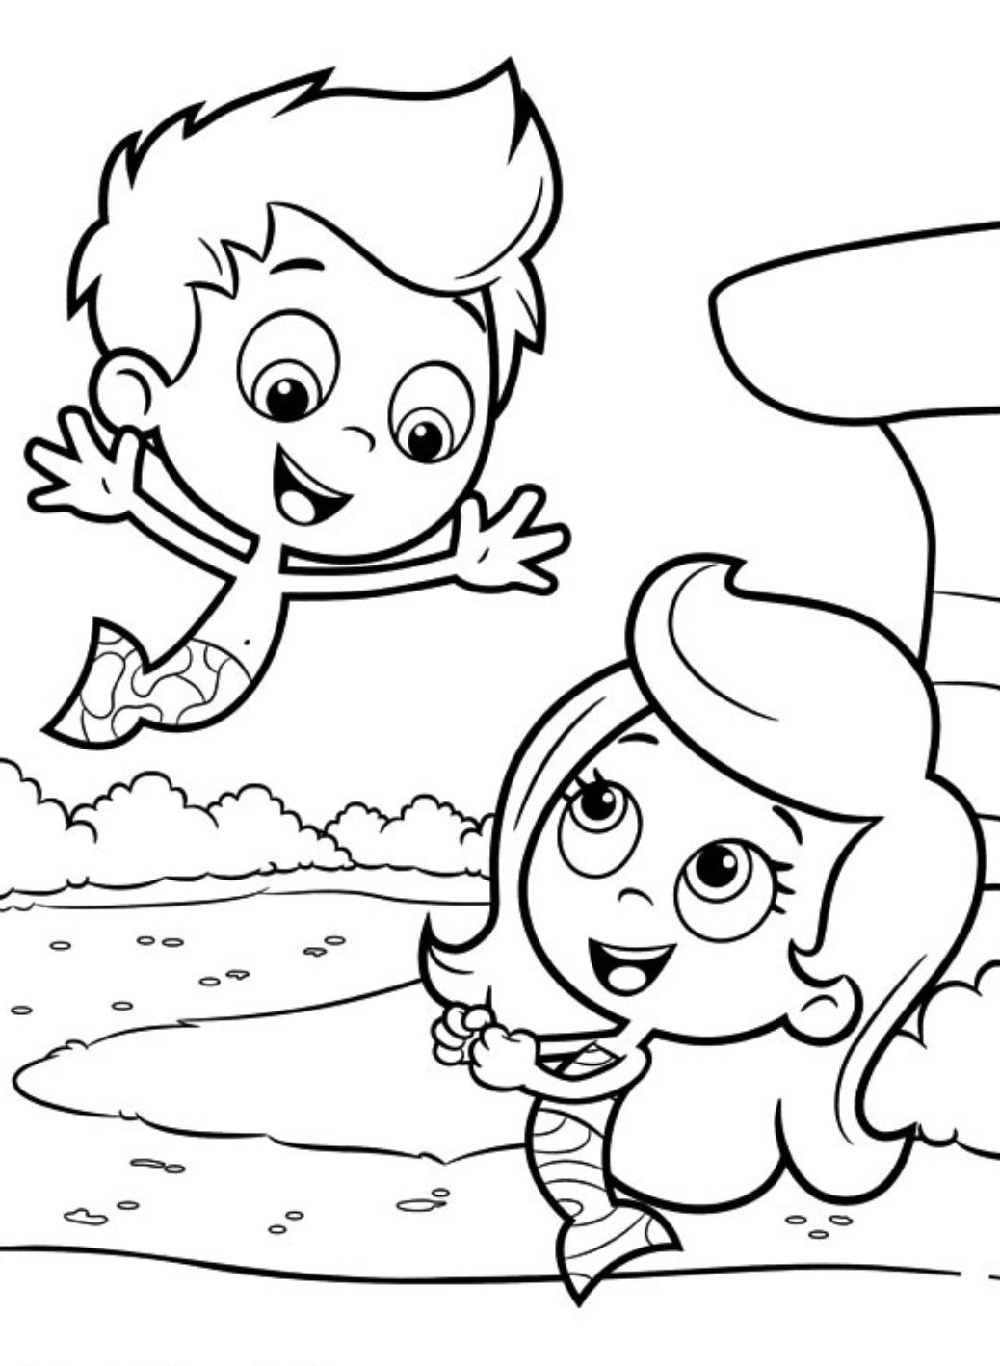 Bubble Guppies Coloring Pages Free